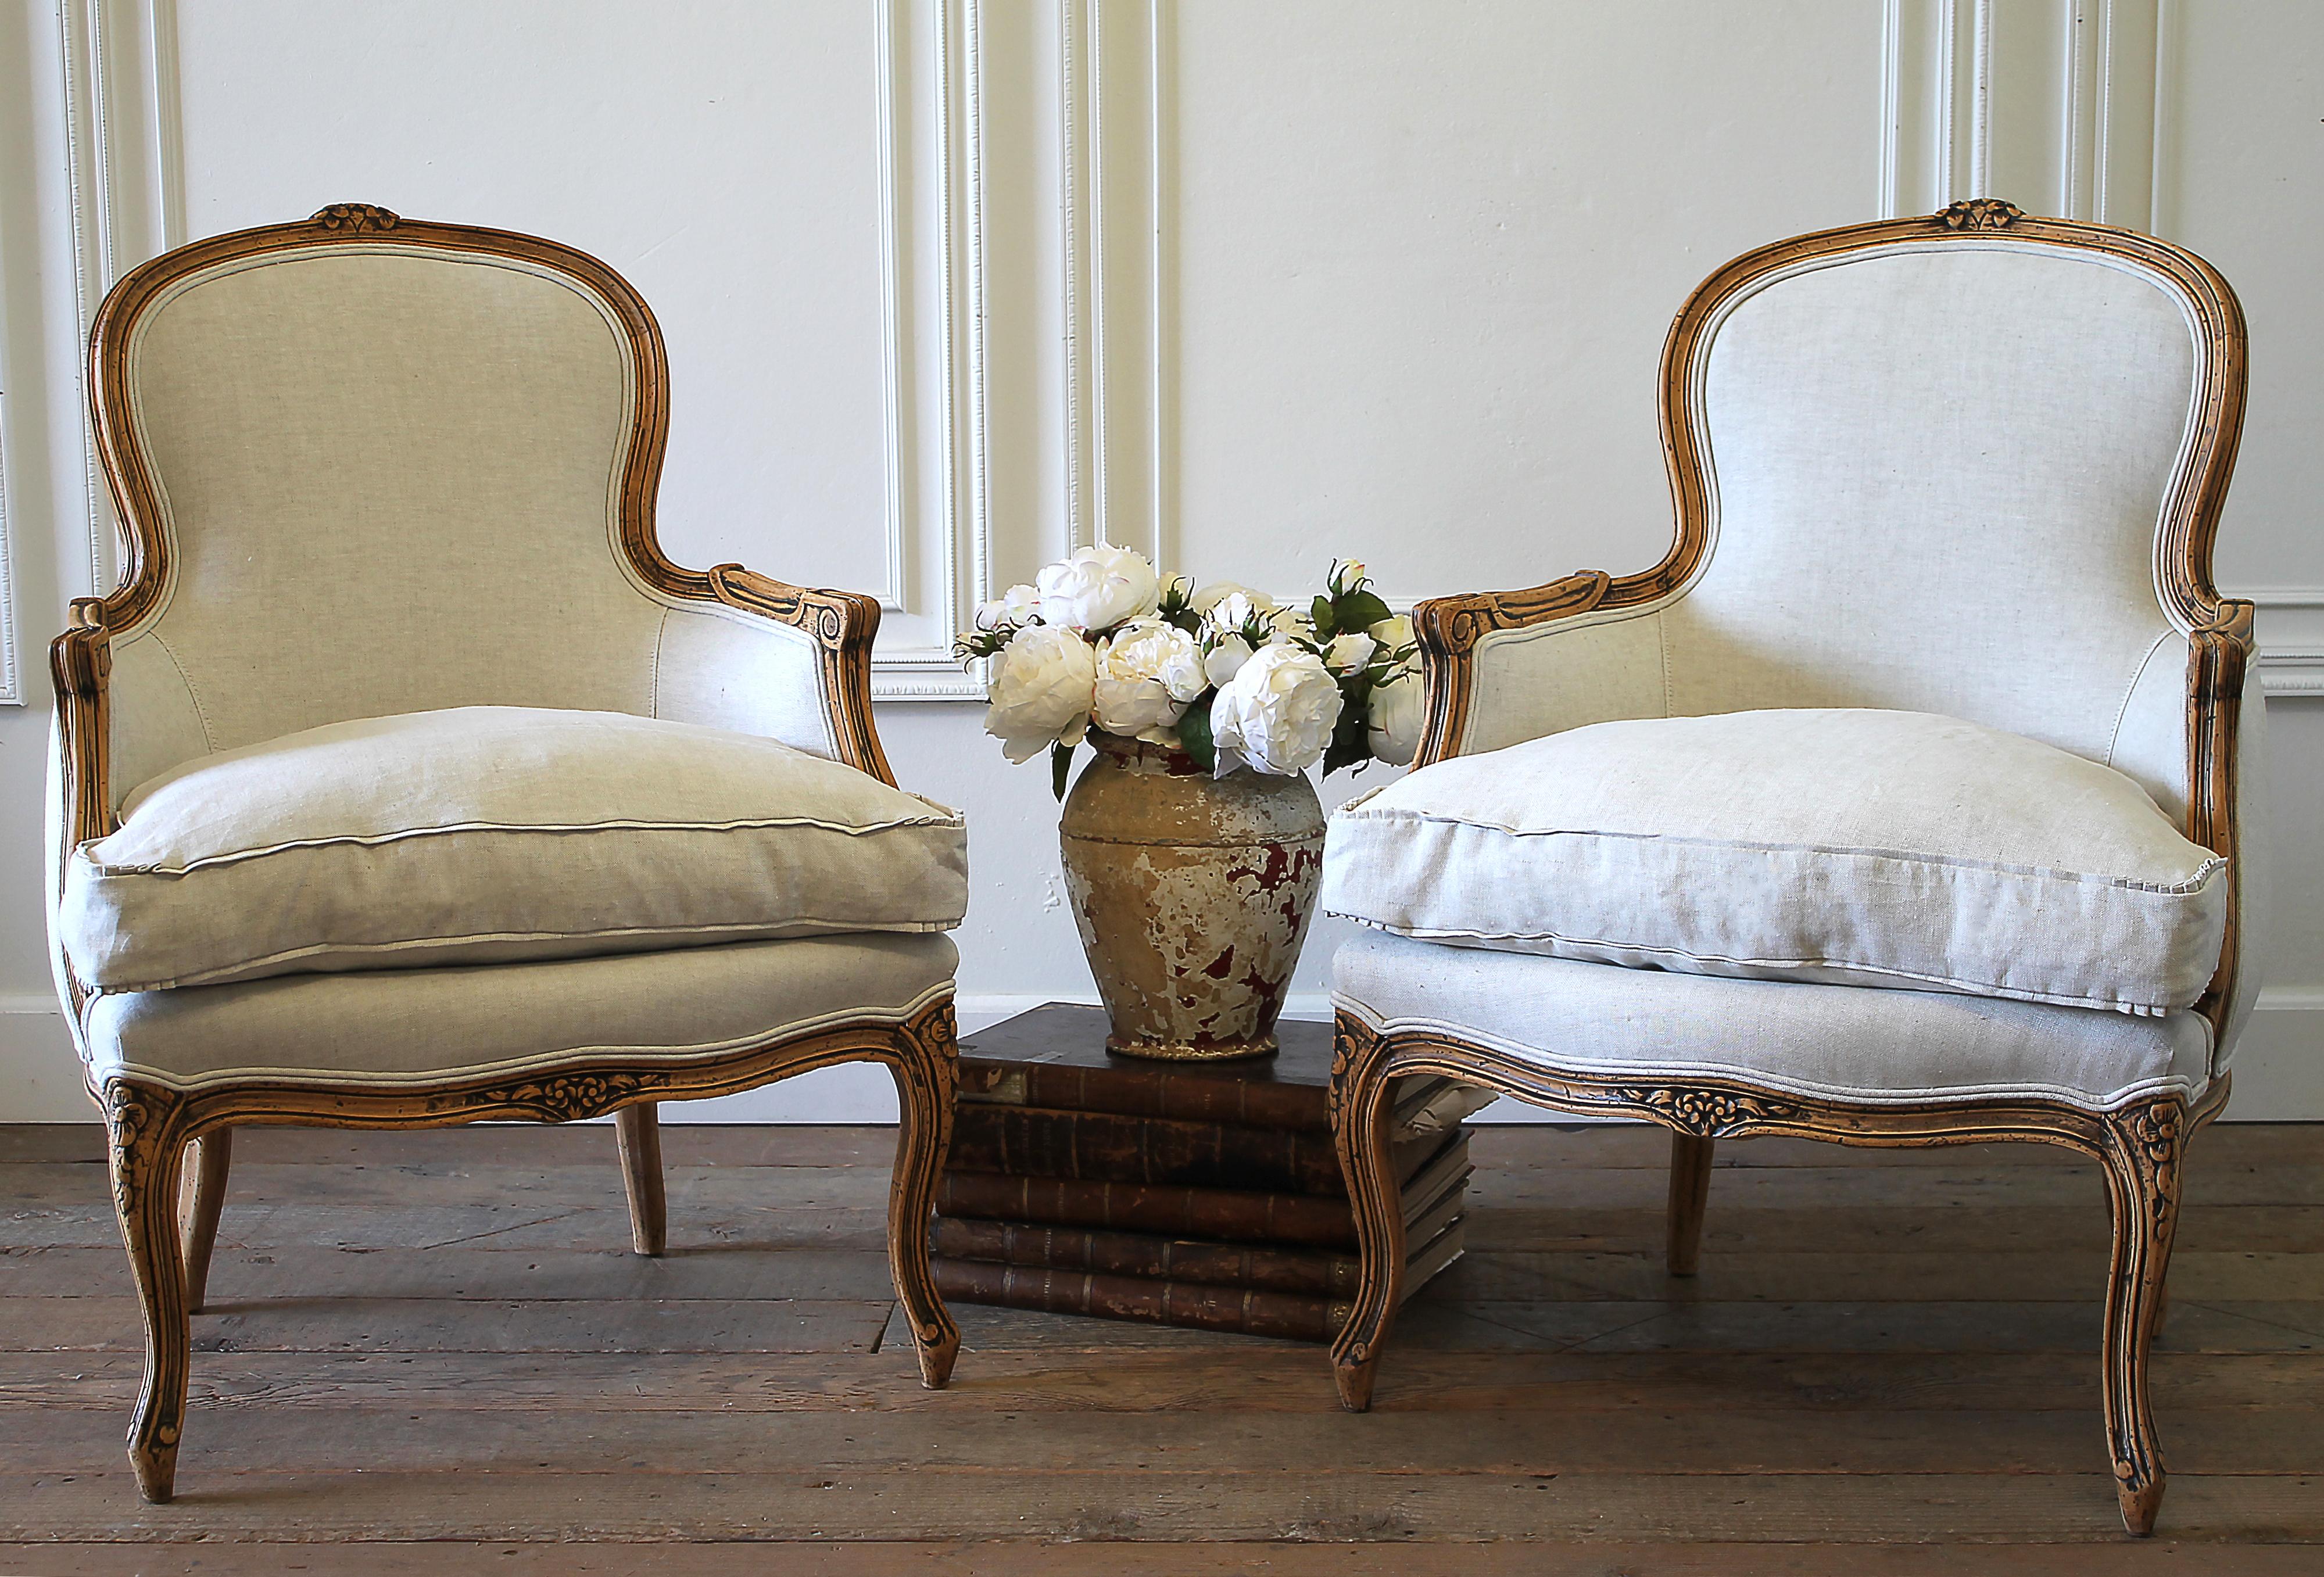 20th century carved and upholstered Louis XV style bergère chairs in linen.
These pair of chairs have a natural wood patina, almost best described as a raw wood, with beautiful patina. Carved Louis XV style, reupholstered in 100% pure Belgian